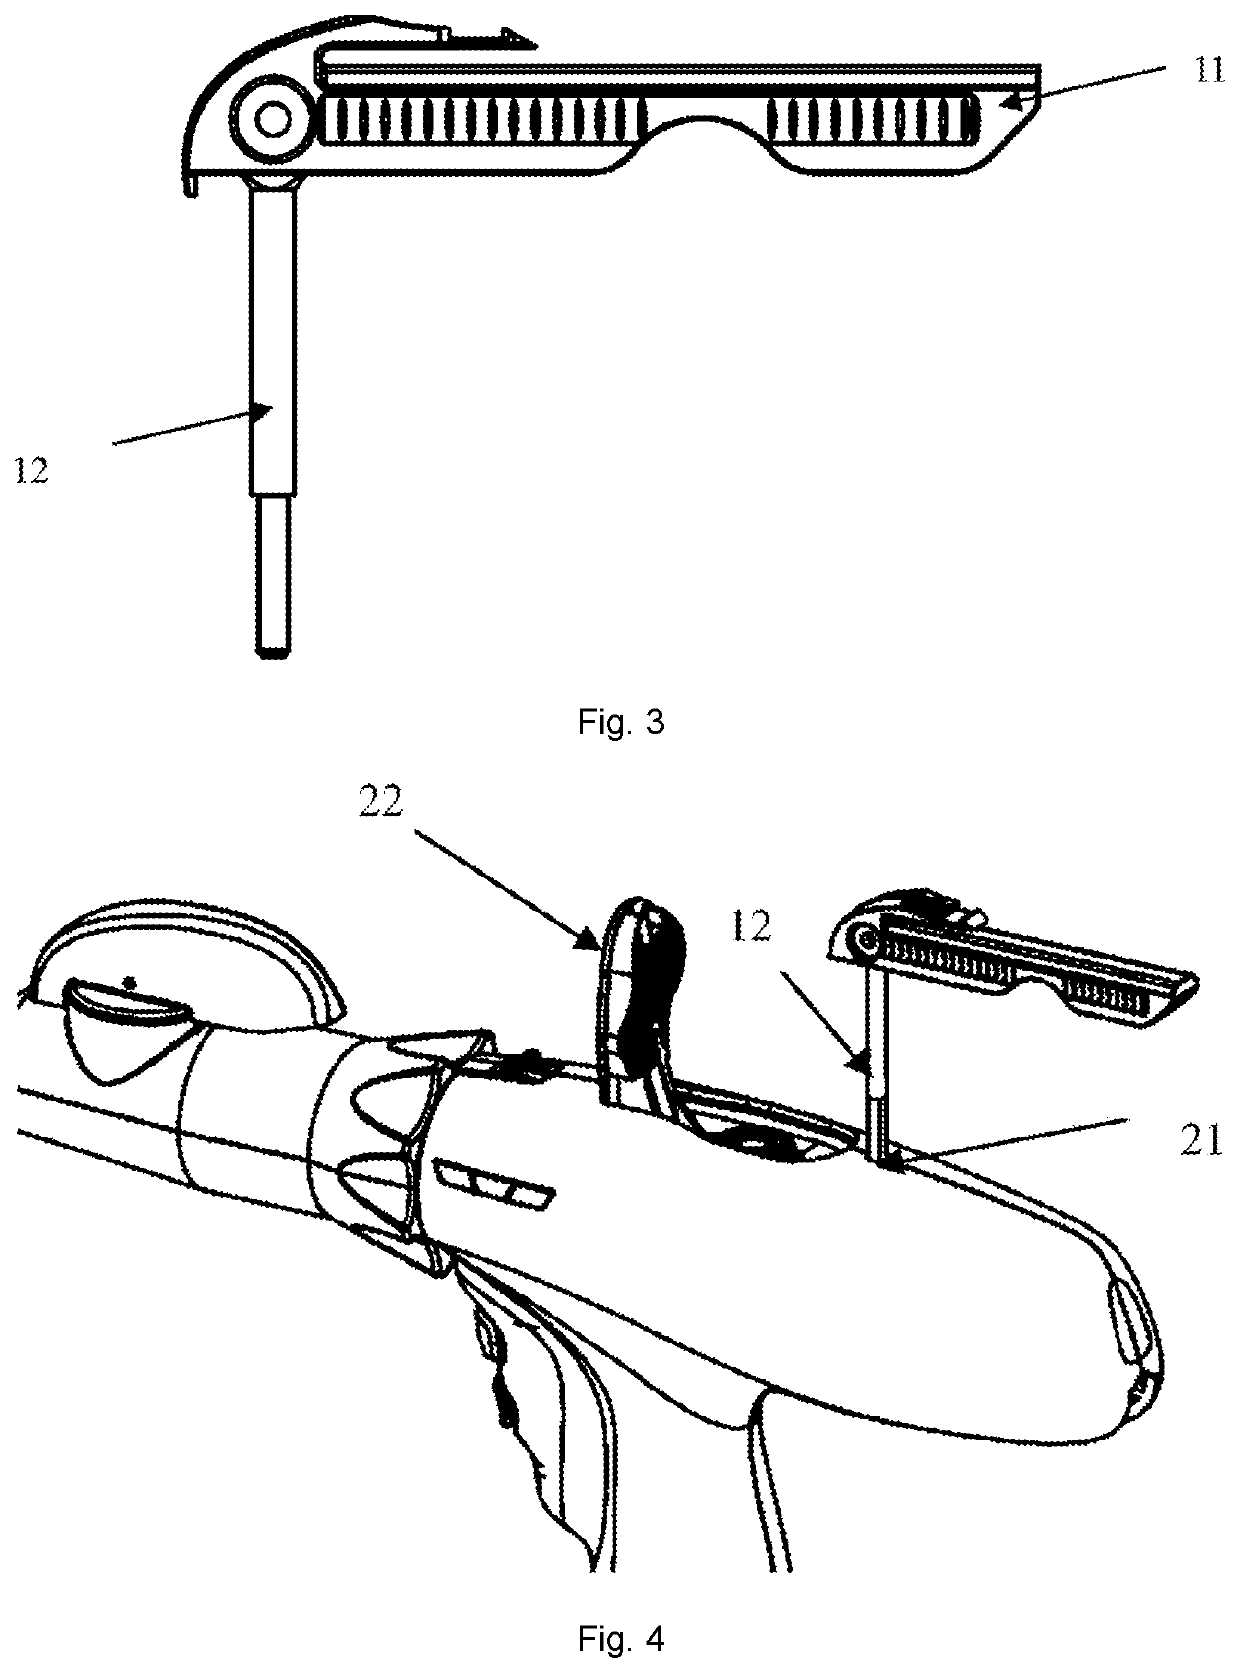 Reset mechanism, stapler, and medical device